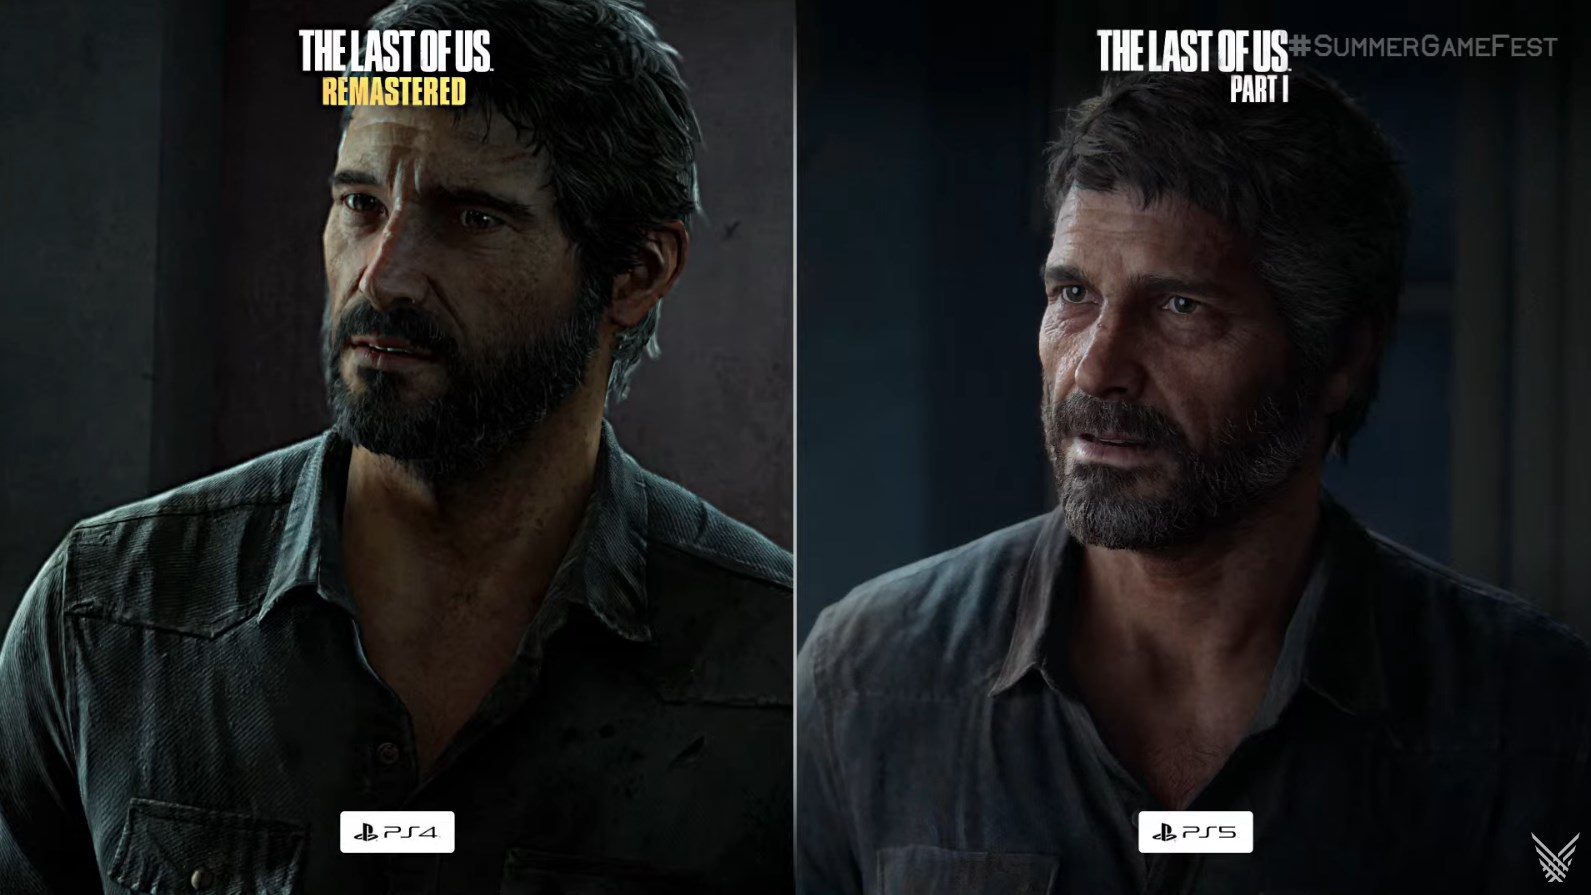 The Last of Us Part II debuts as the game for an uneasy summer